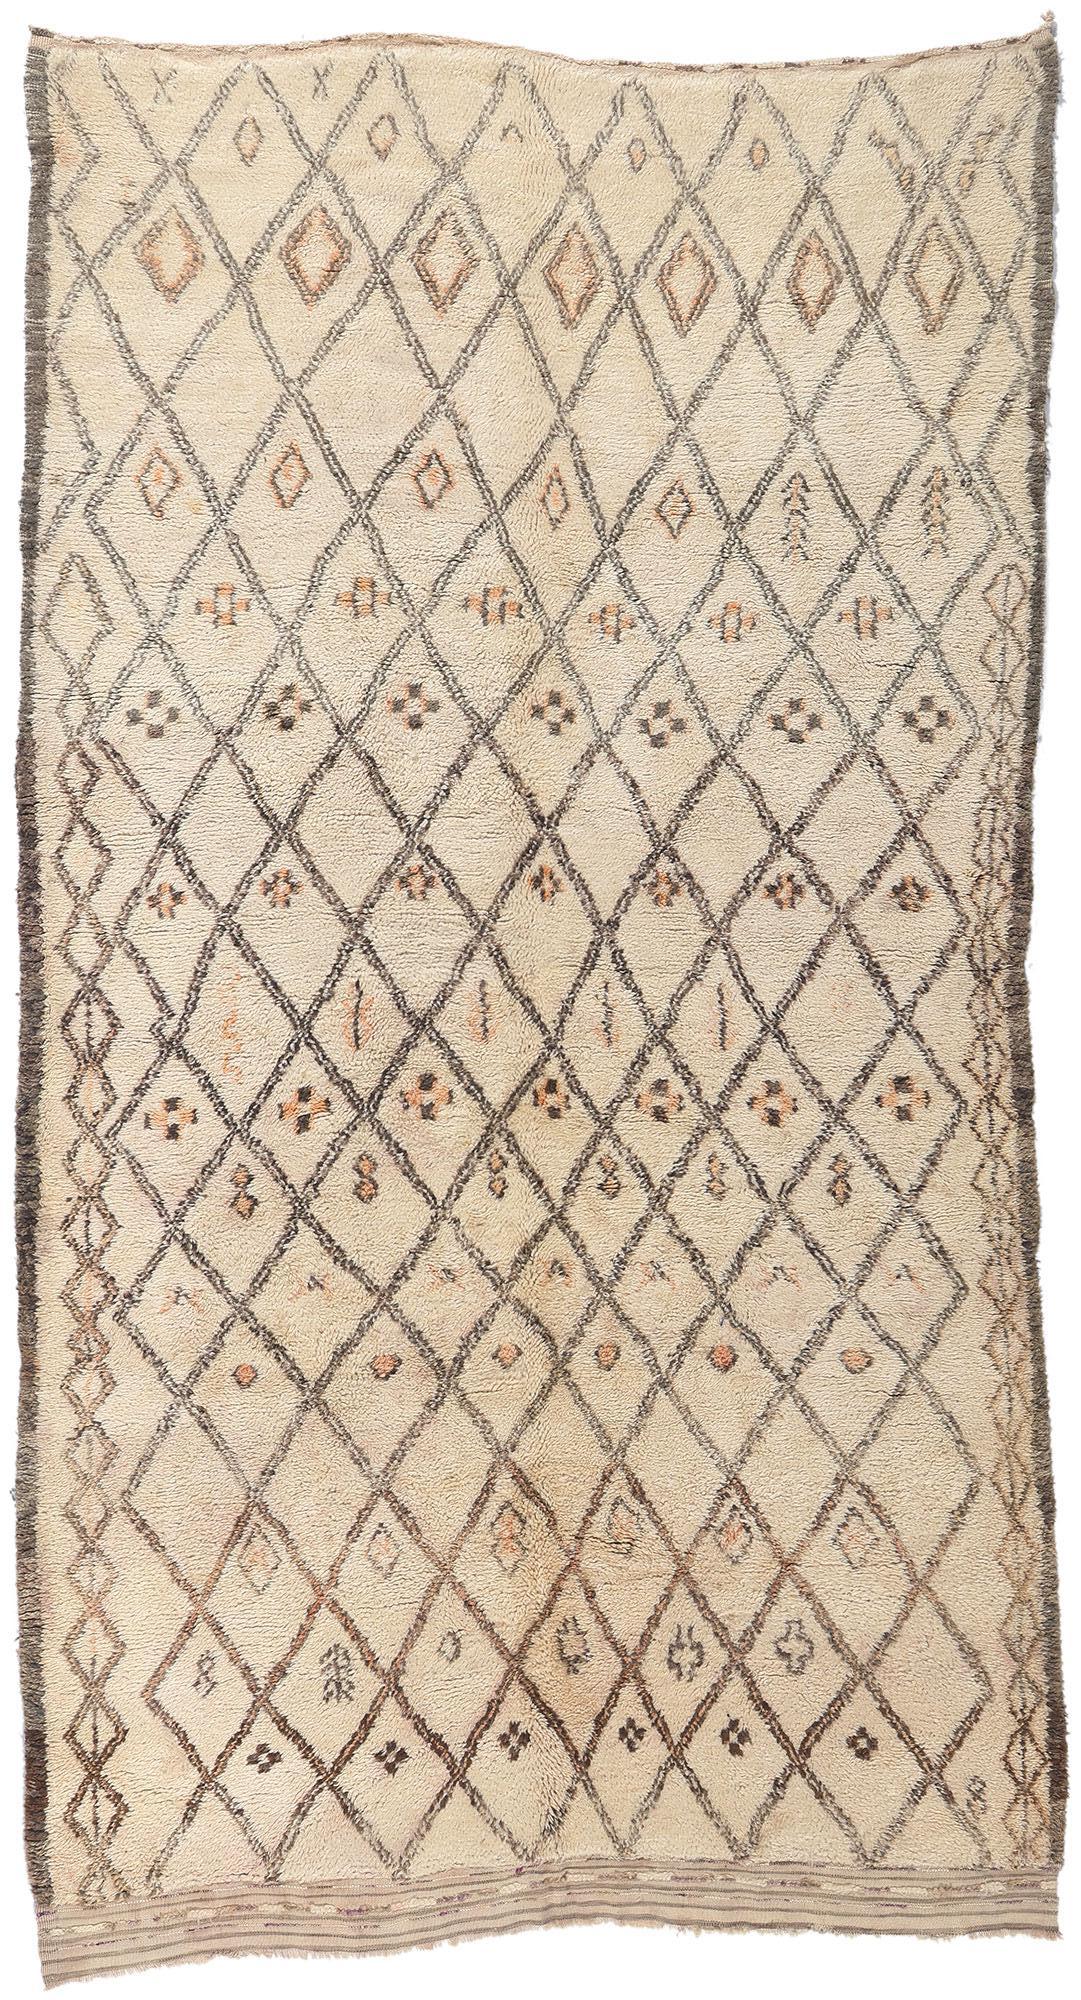 Vintage Moroccan Beni Ourain Rug, Midcentury Modern Style Meets Shibui For Sale